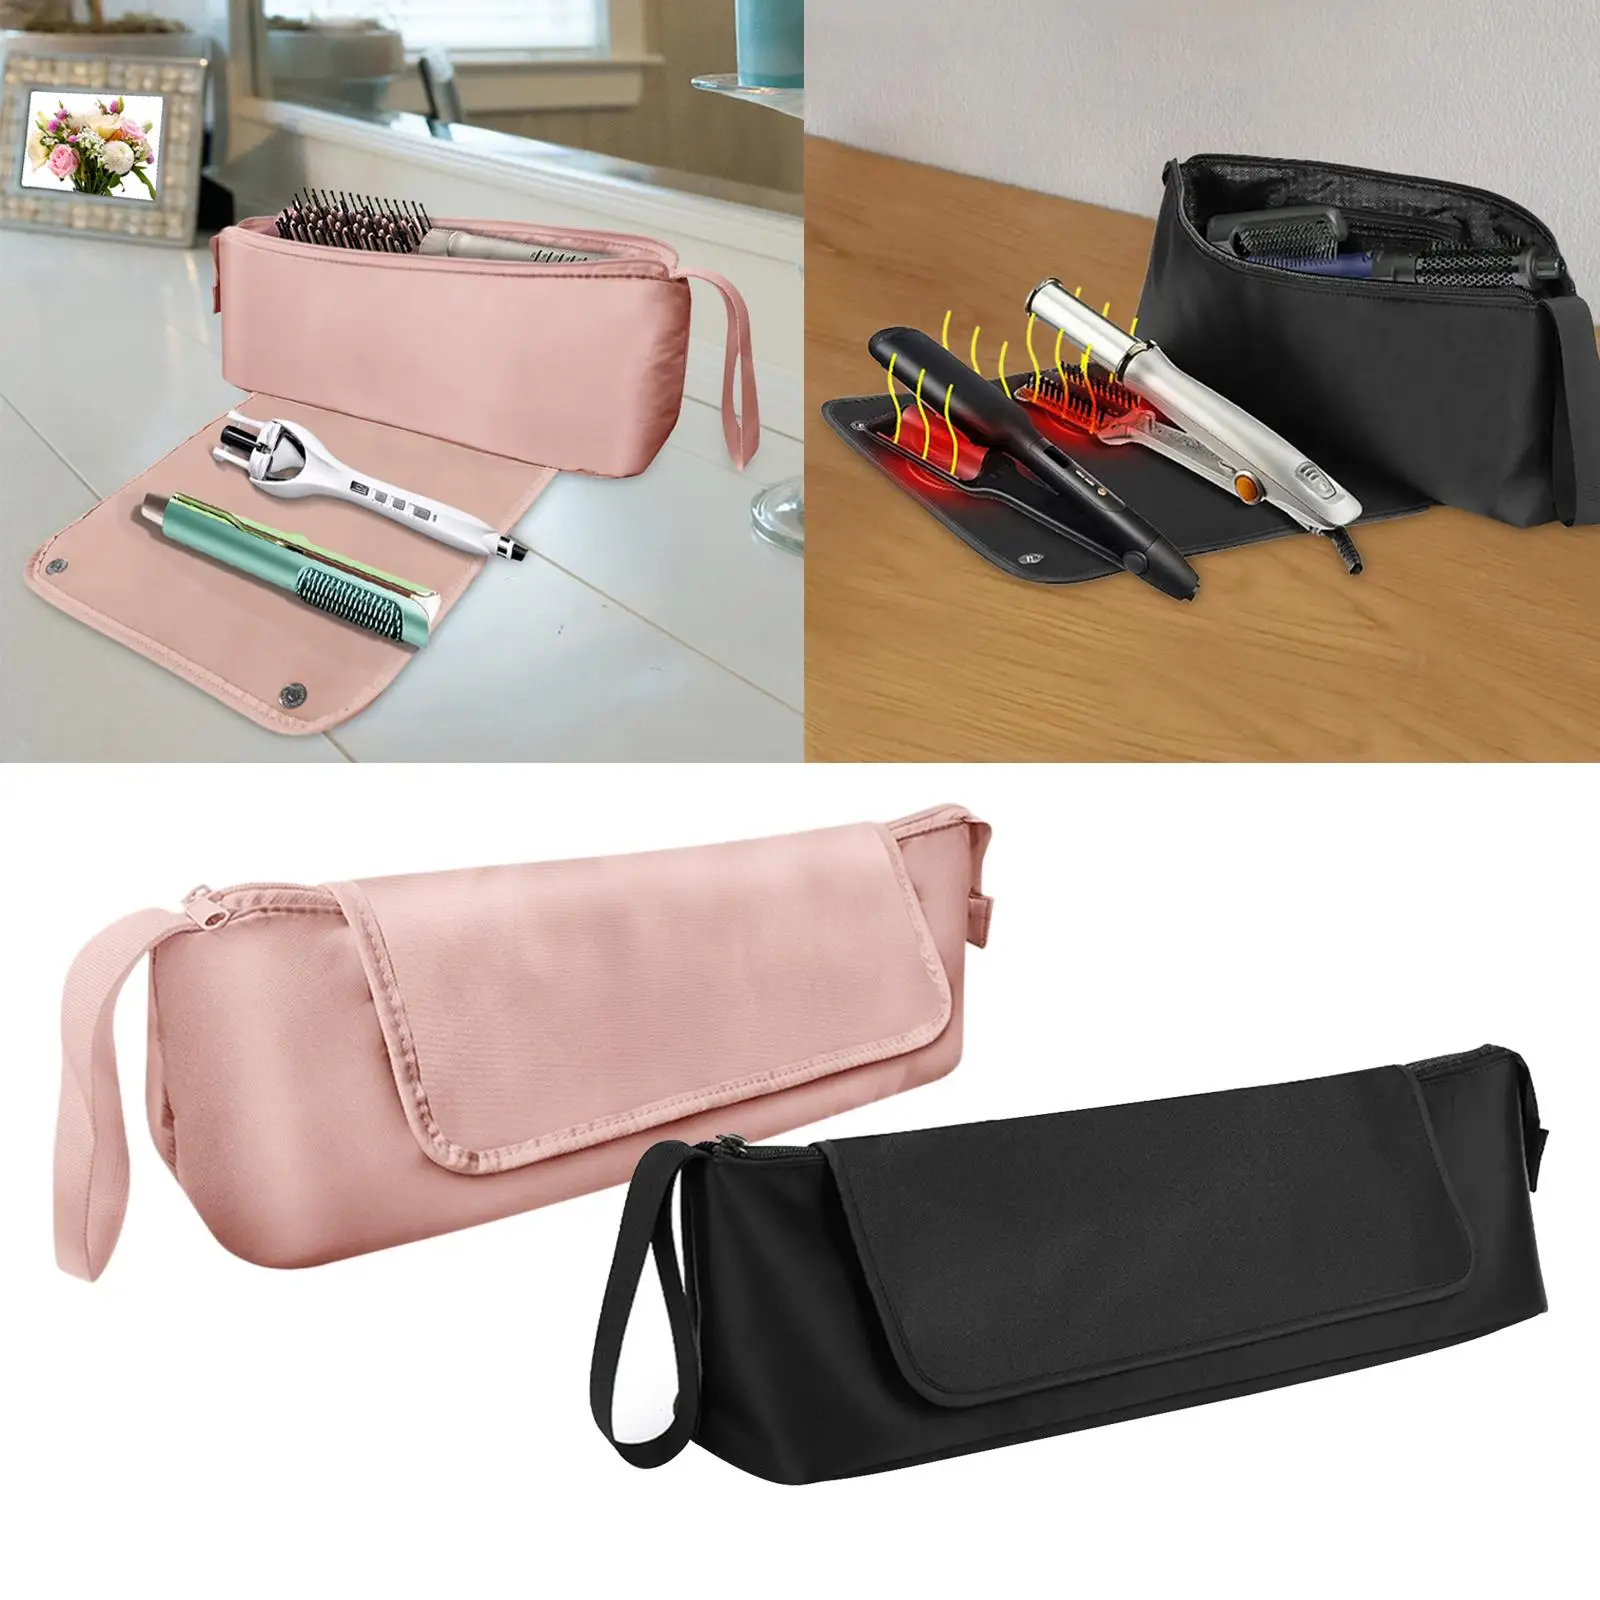 Hair Tool Travel Bag Hair Styling Accessory Organizer for Curling Iron Styling Irons Hair Styling Tools Travel Woman Gift